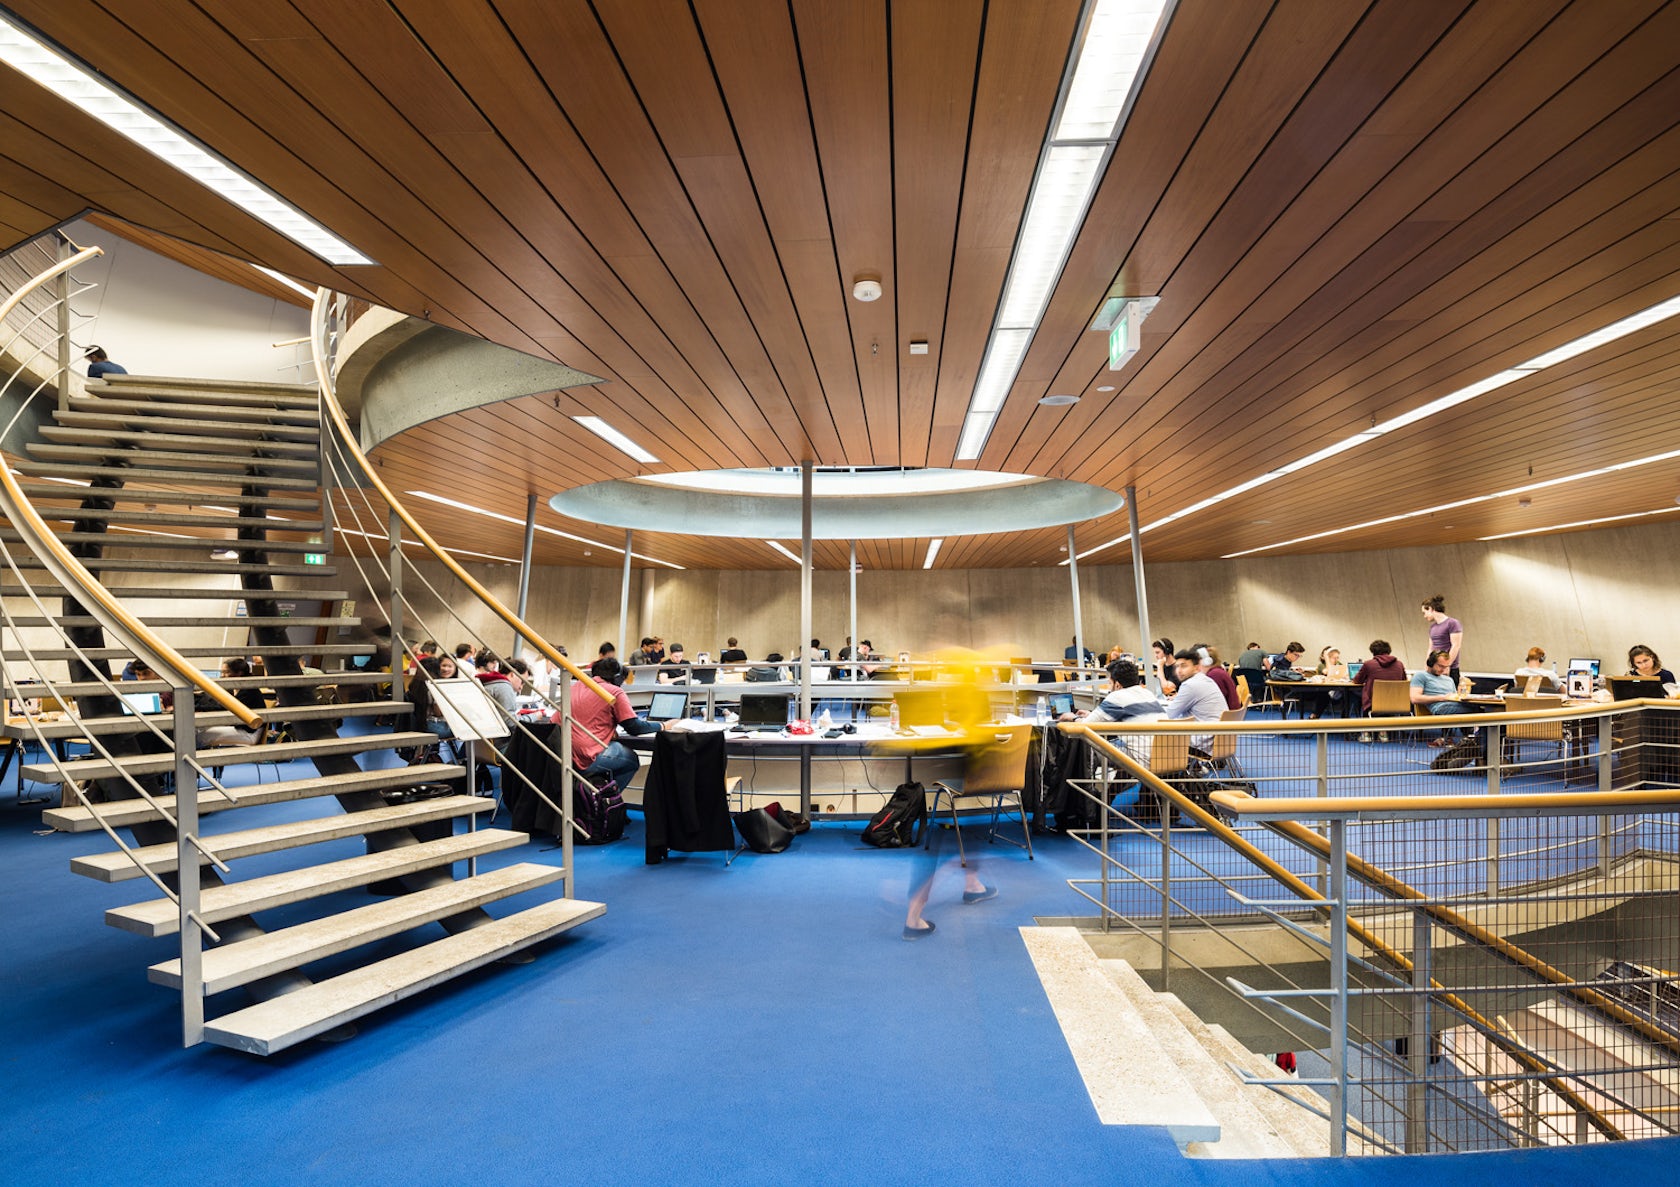 Tu delft library phd thesis